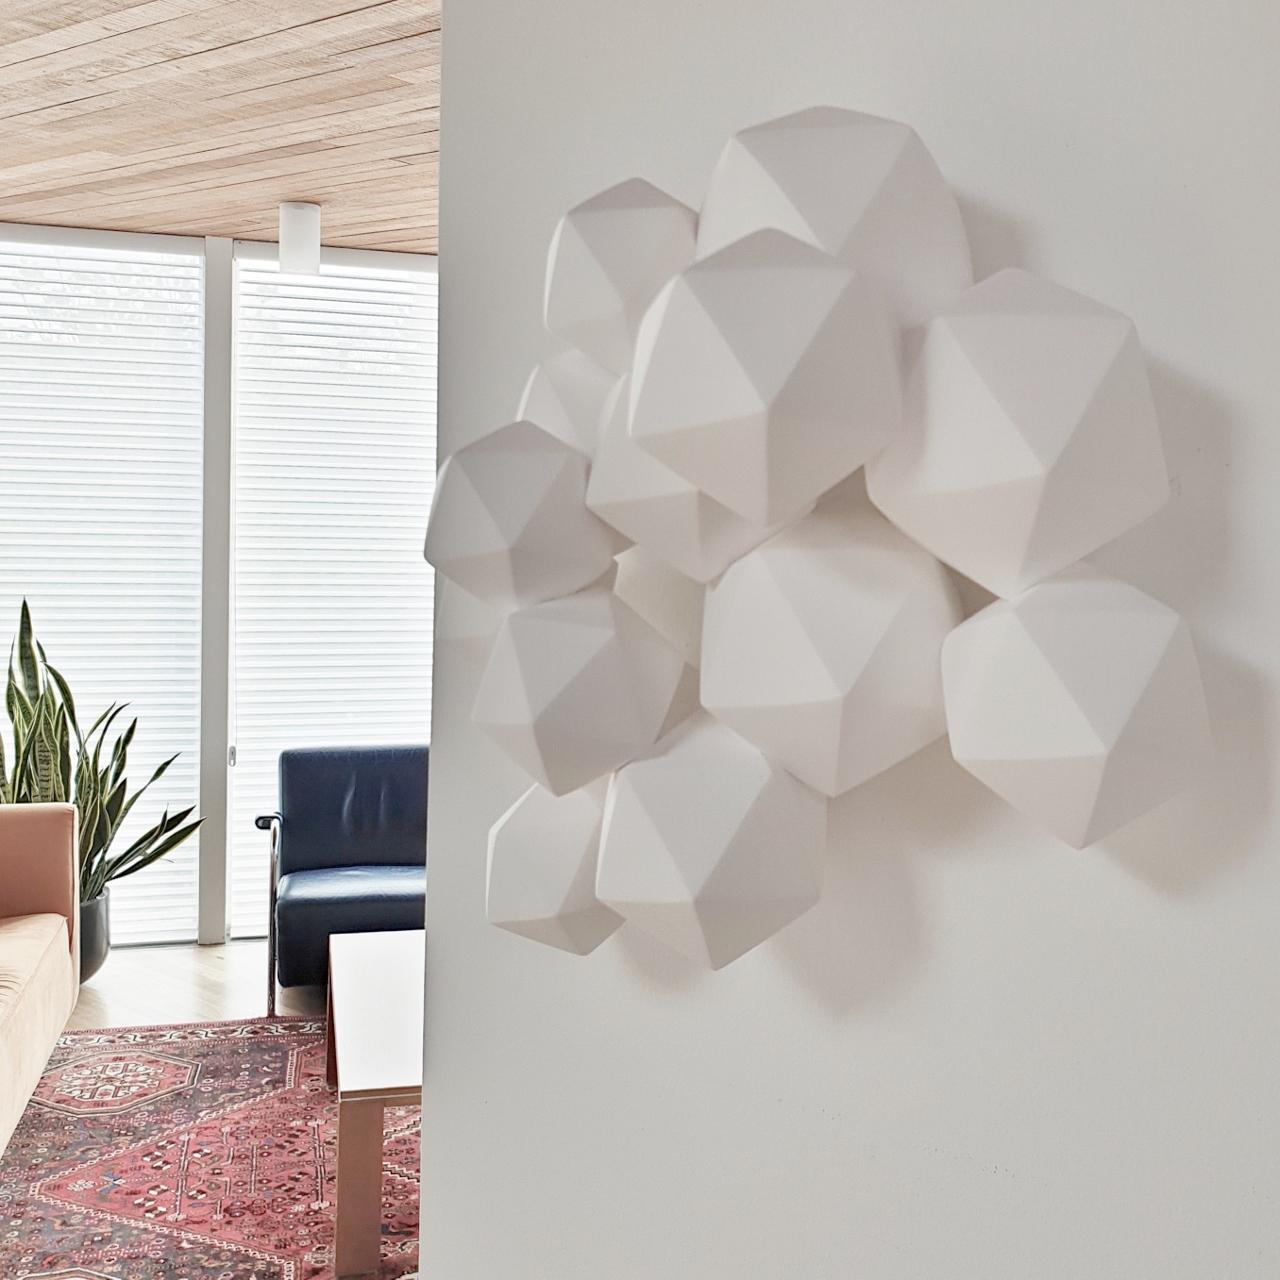 Halfway - contemporary modern abstract geometric ceramic wall sculpture - Sculpture by Mo Cornelisse